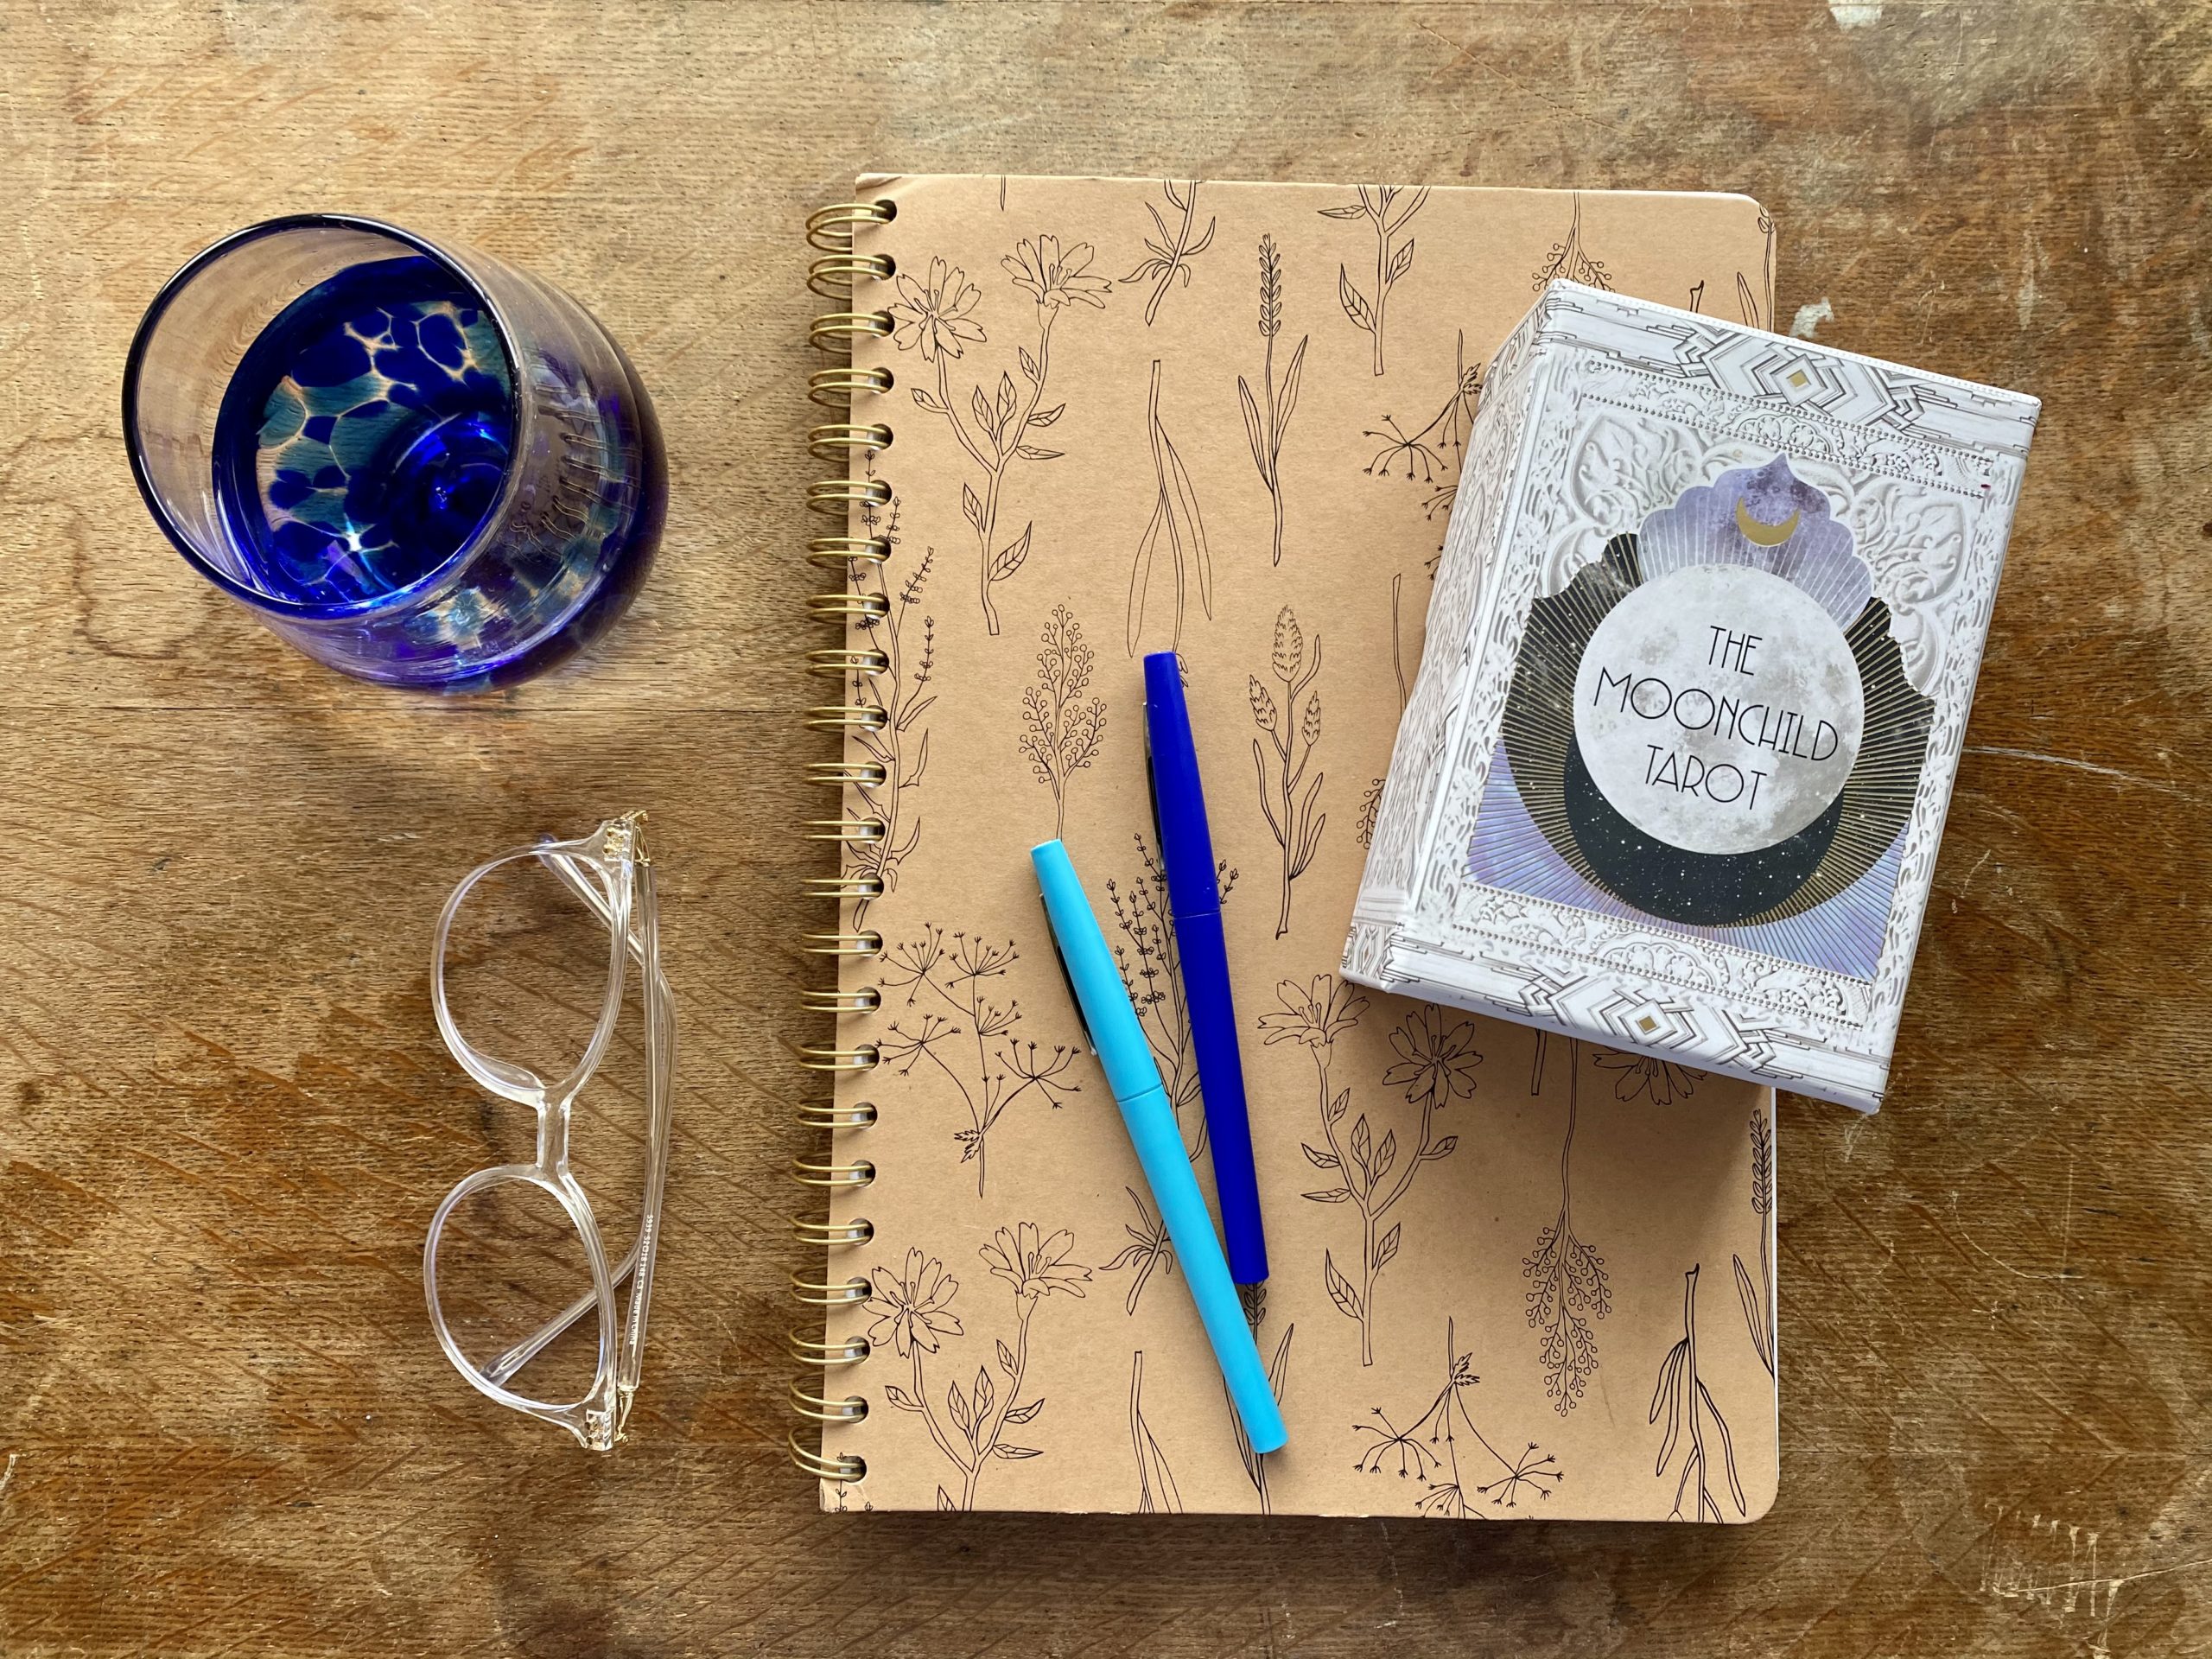 A journal rests on a desk with two blue markers, a pair of clear glasses, a blue water glass and a deck of tarot cards